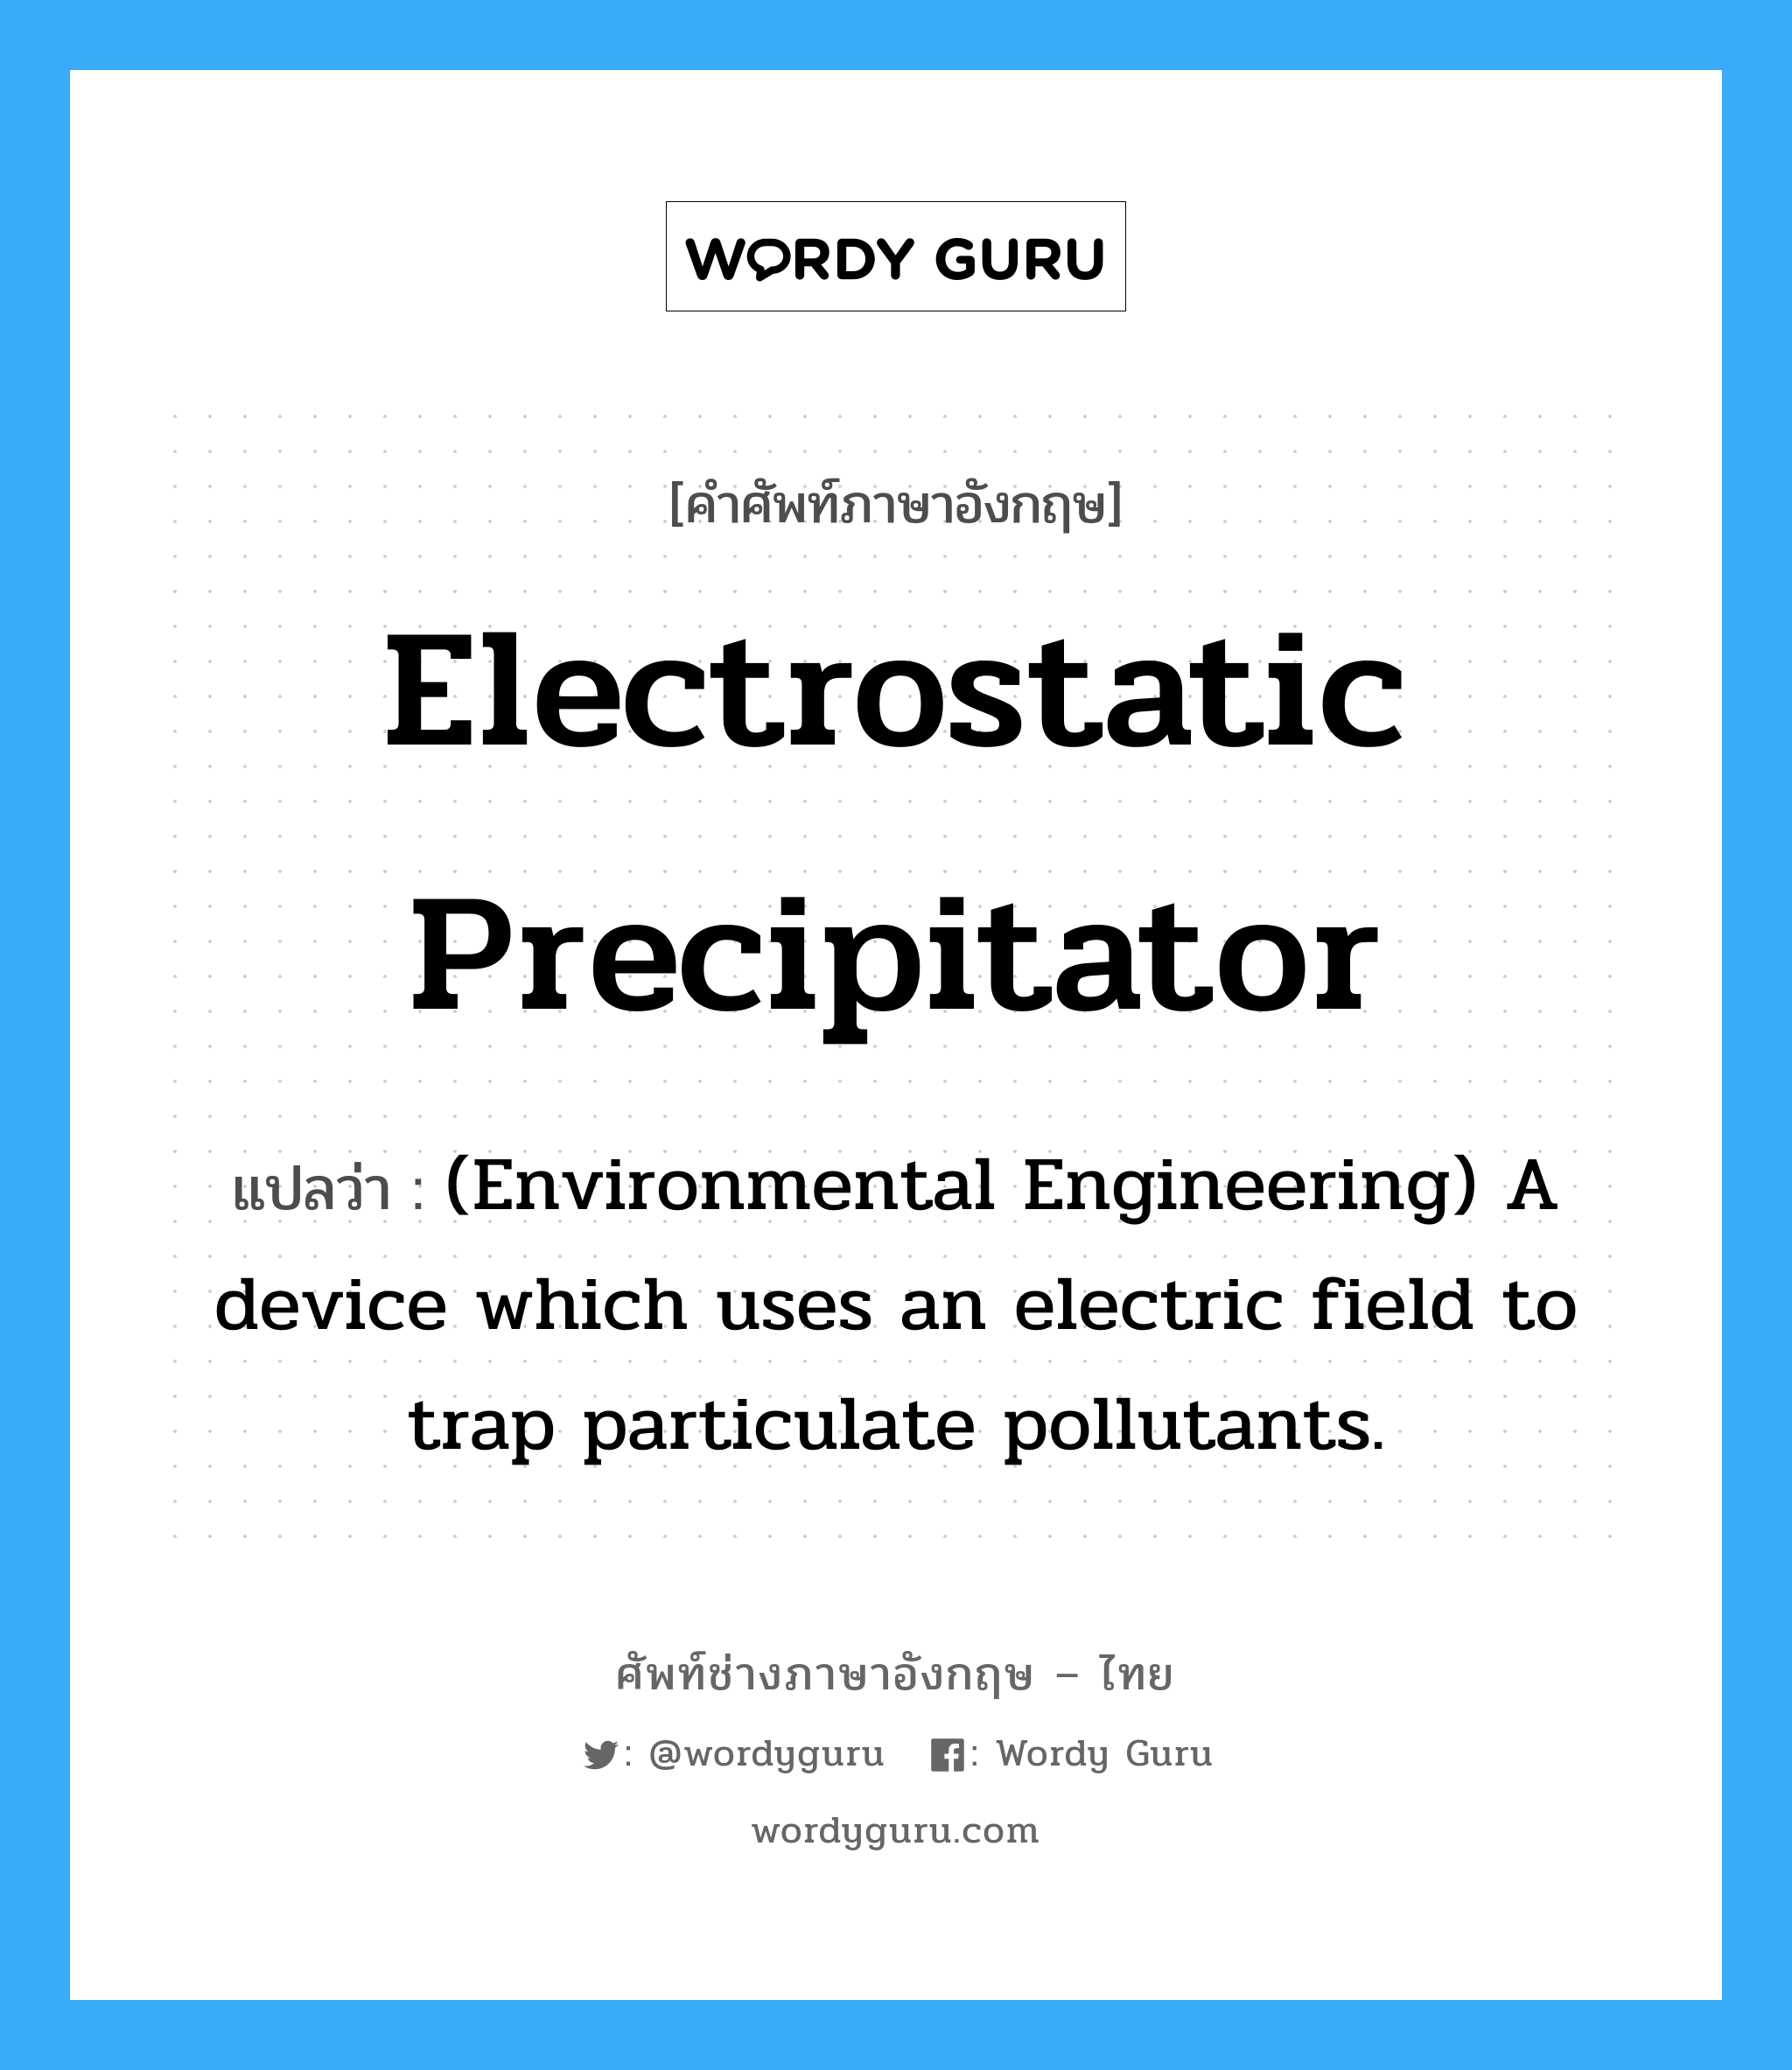 Electrostatic precipitator แปลว่า?, คำศัพท์ช่างภาษาอังกฤษ - ไทย Electrostatic precipitator คำศัพท์ภาษาอังกฤษ Electrostatic precipitator แปลว่า (Environmental Engineering) A device which uses an electric field to trap particulate pollutants.